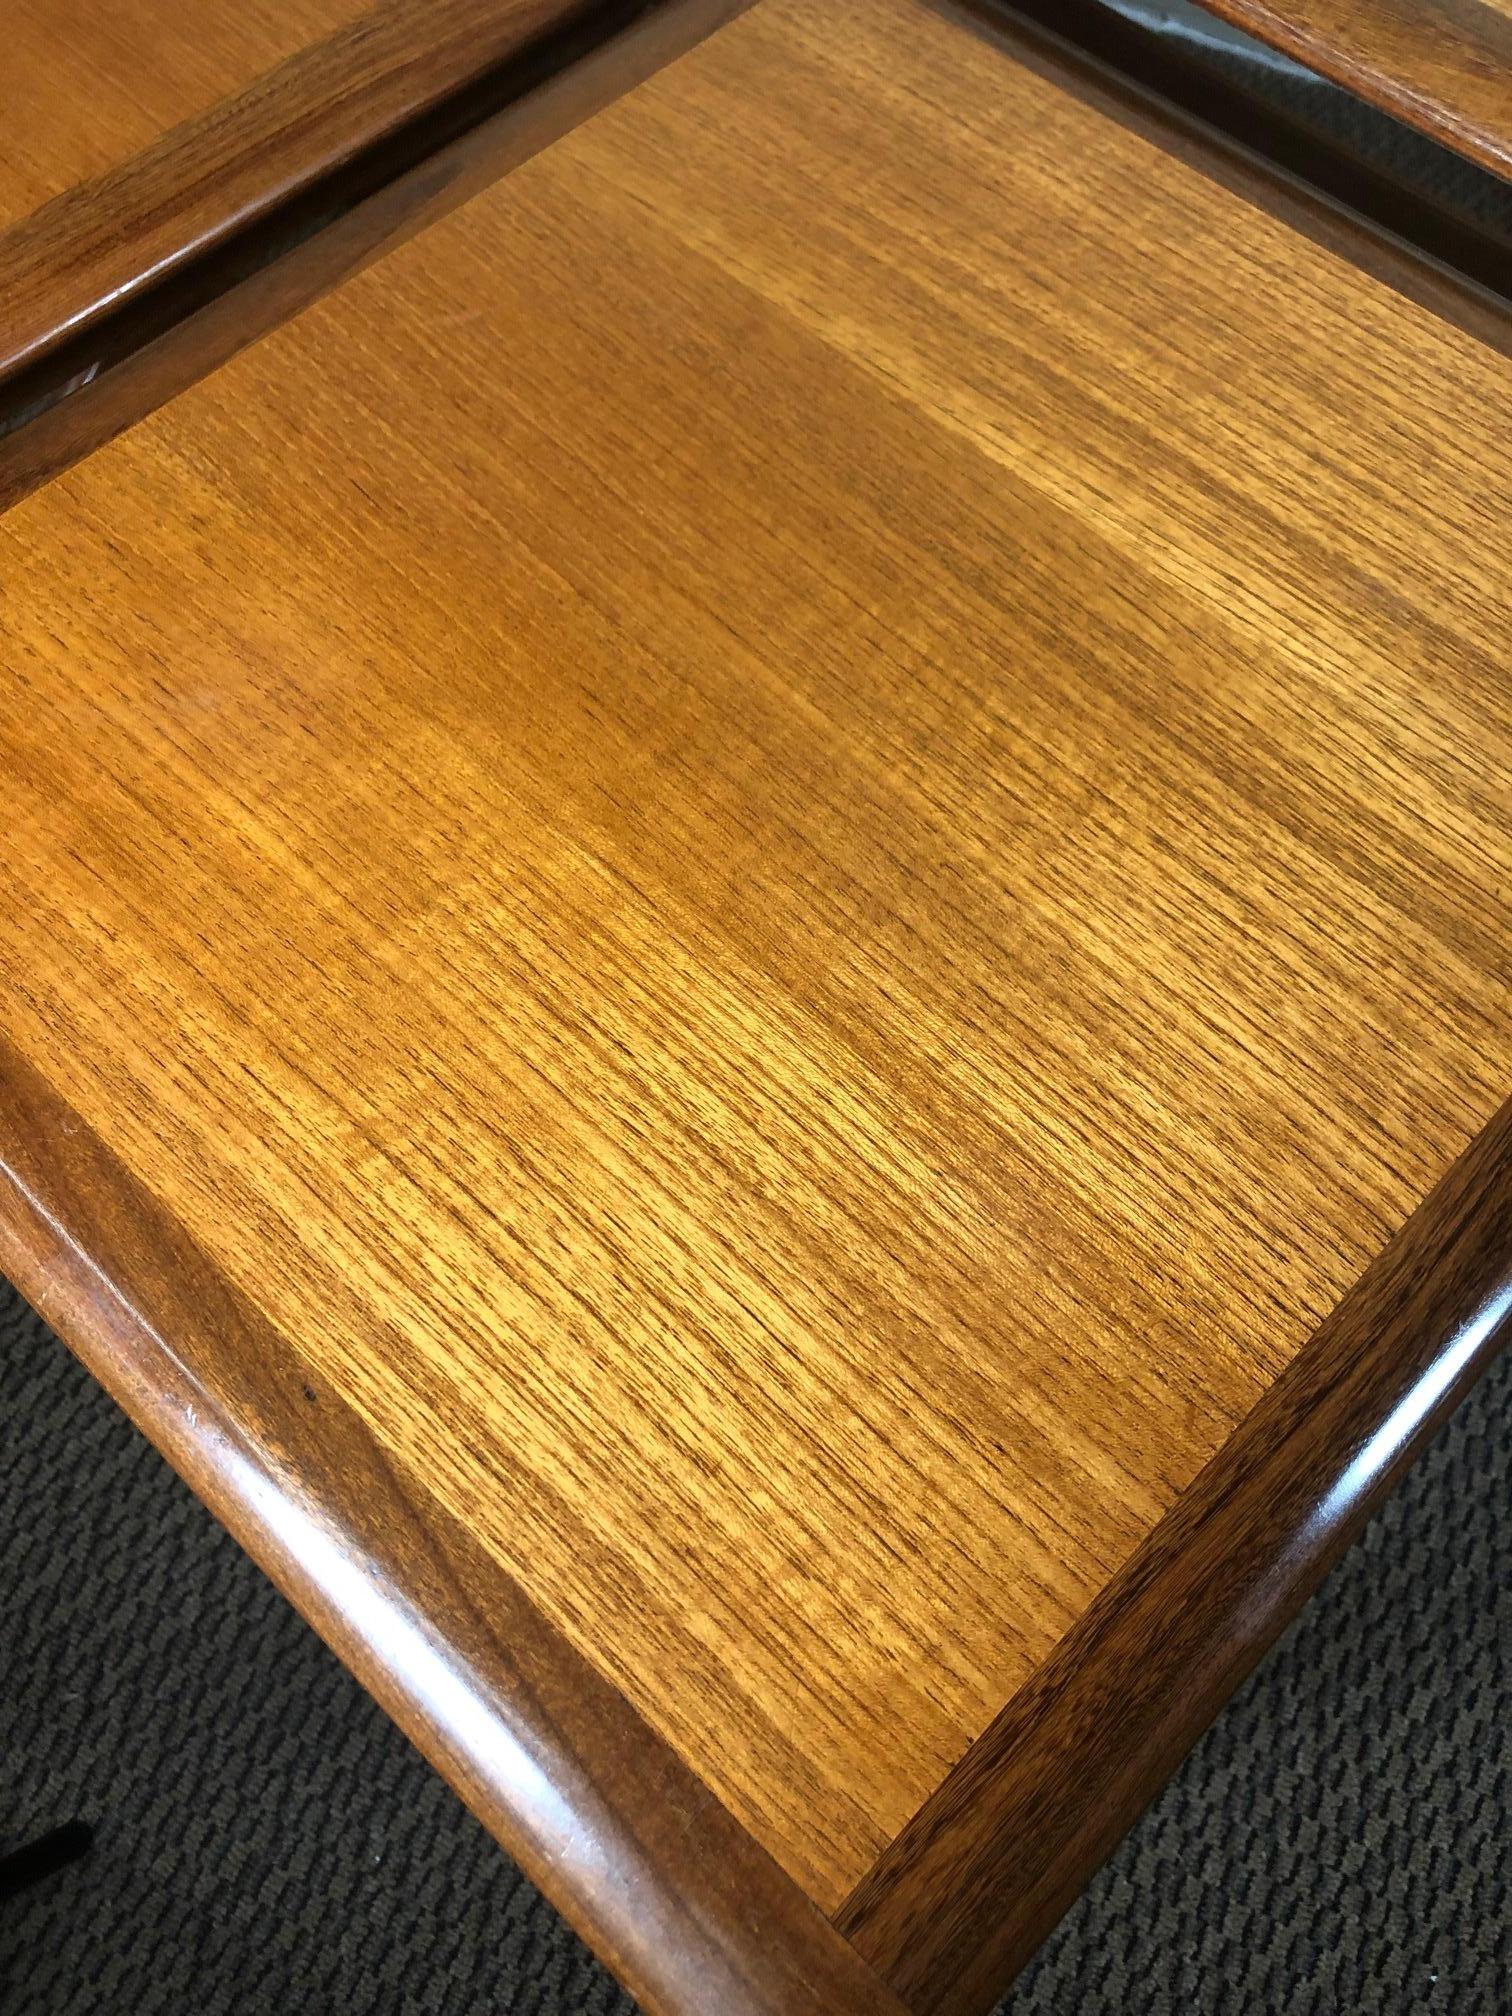 Midcentury Teak Coffee and Nesting Table Set by G Plan In Good Condition For Sale In Norcross, GA